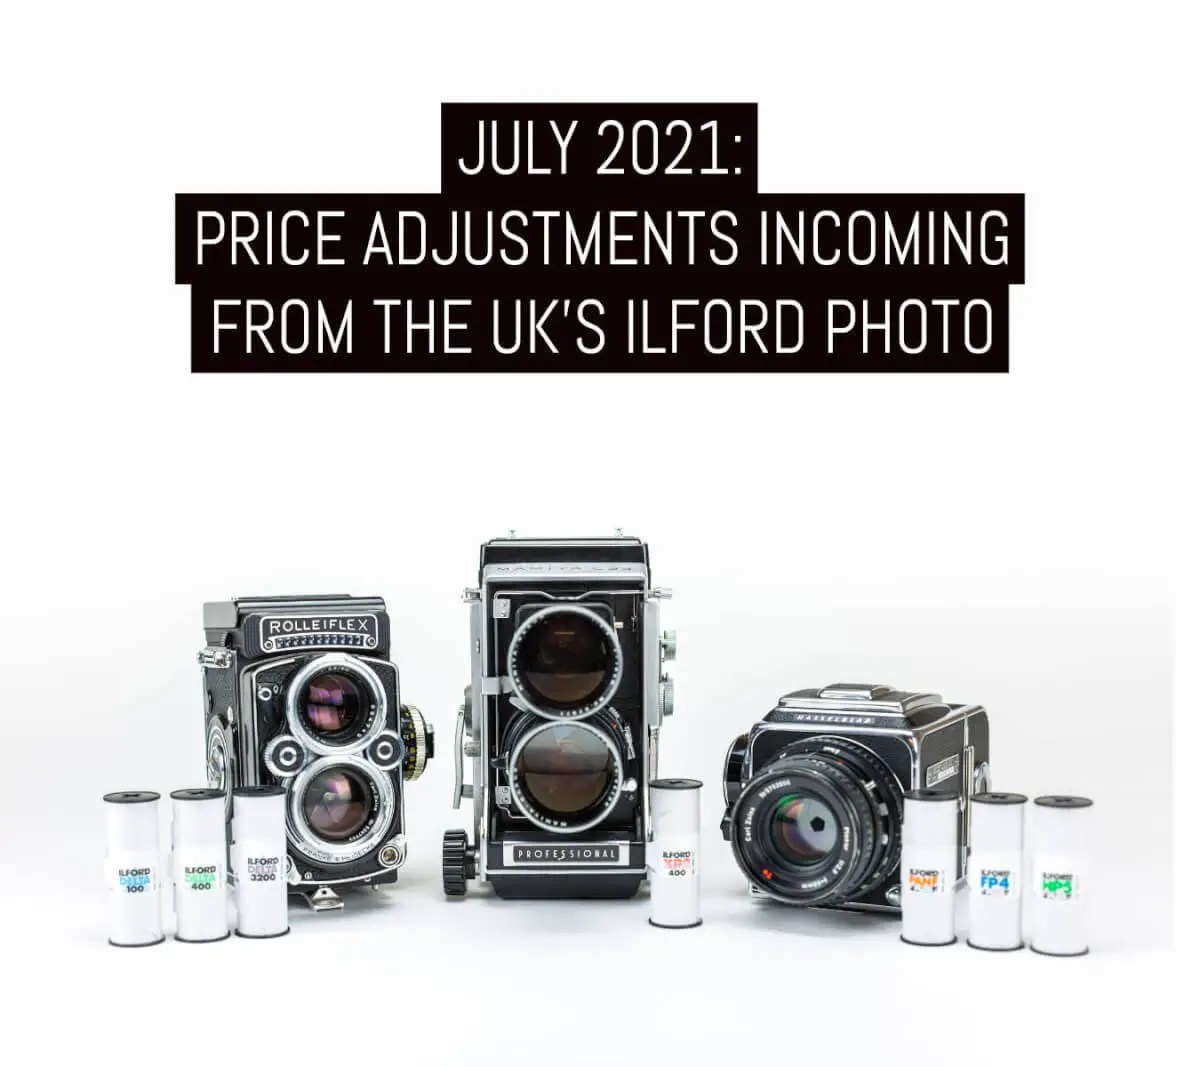 July 2021: Price adjustments incoming from the UK's ILFOR